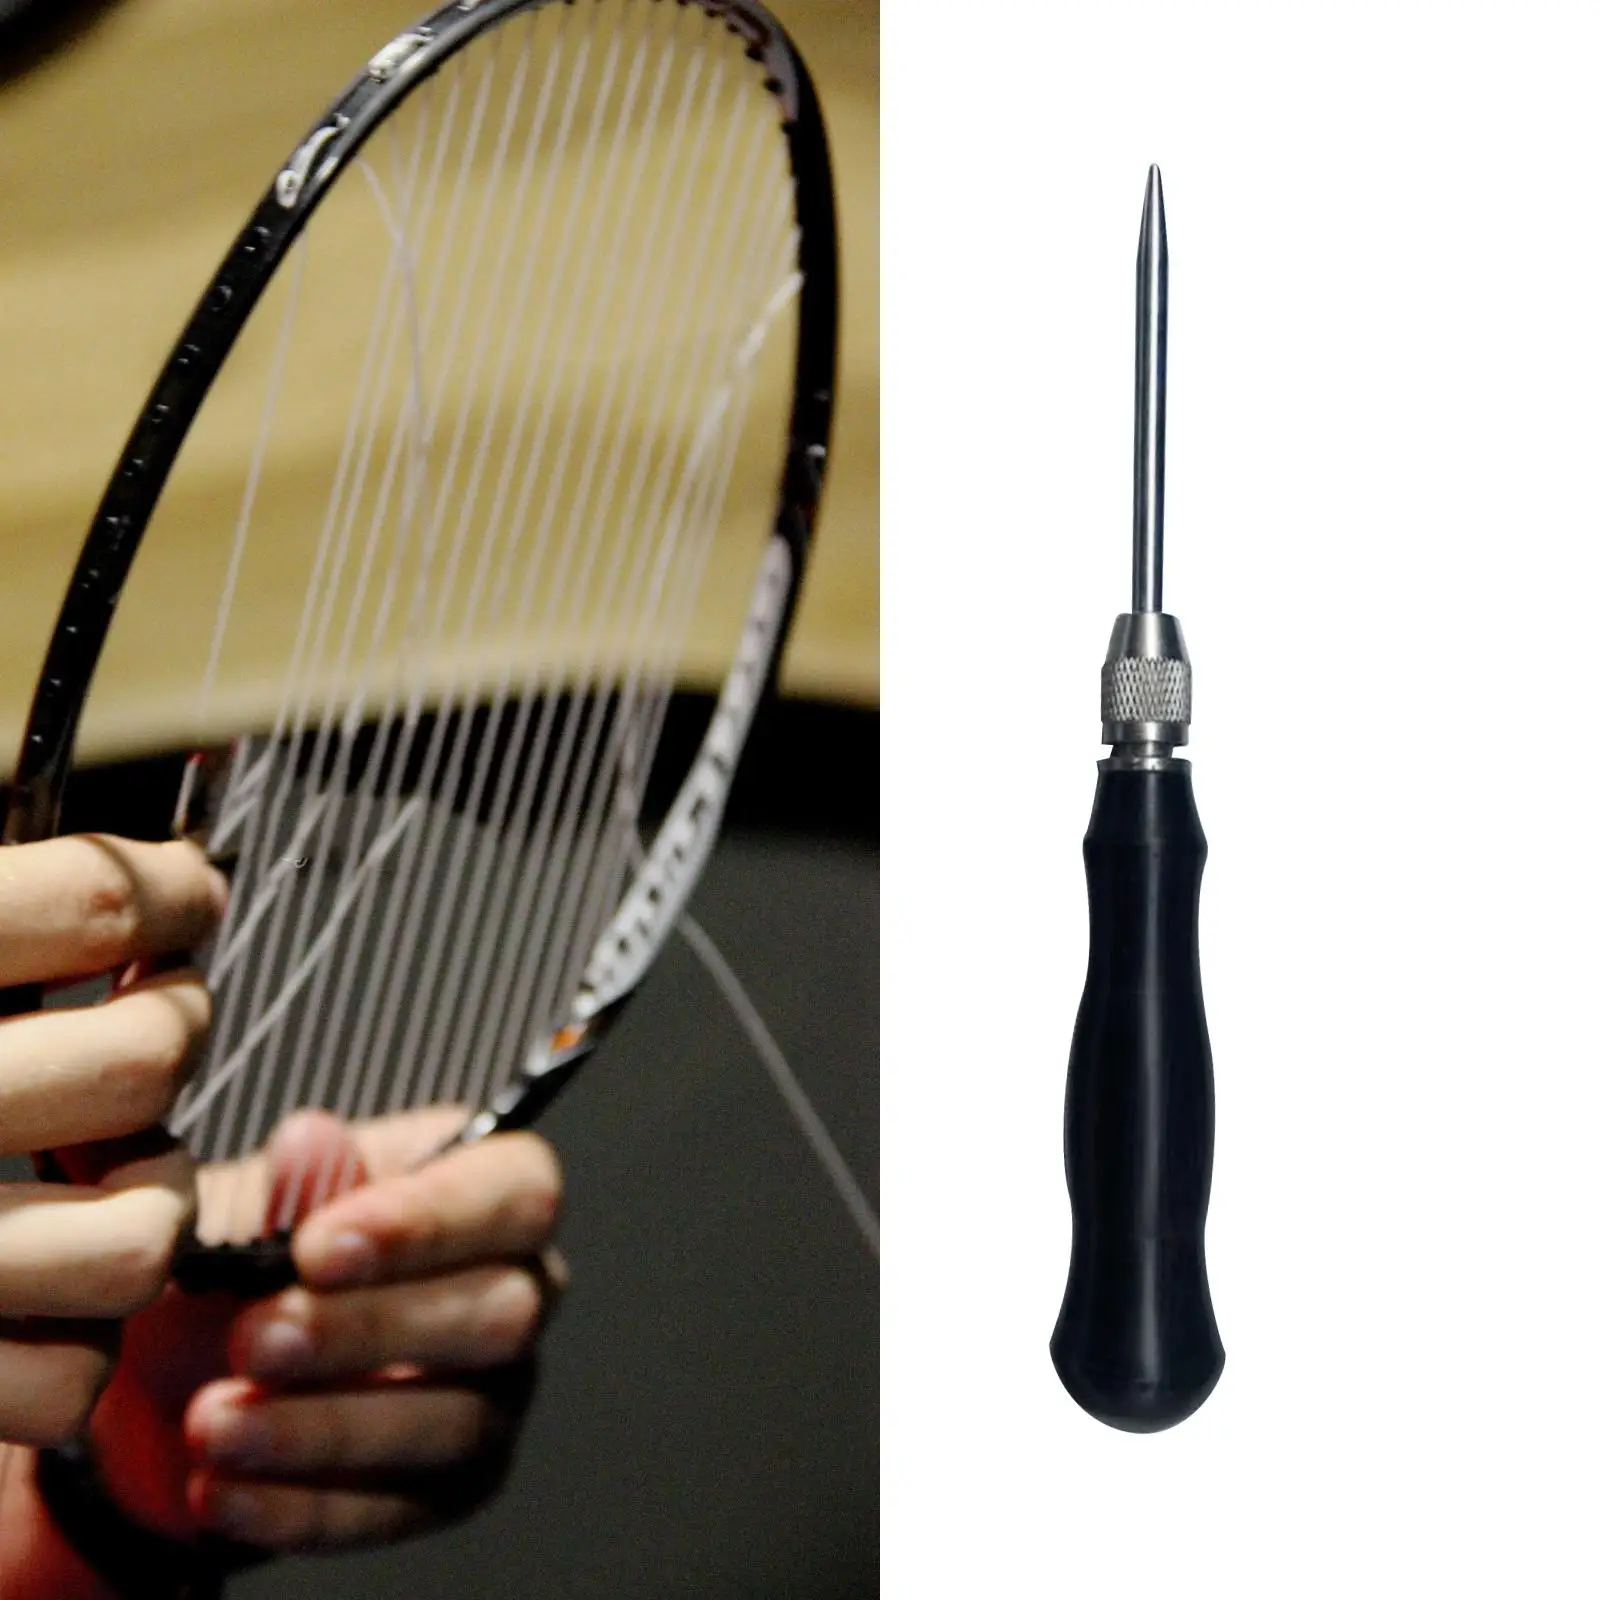 Racquet Stringing Straight Awl Fix Durable Convenient to Use Anti Slip Racket String Assistance Puller for Badminton Racquet